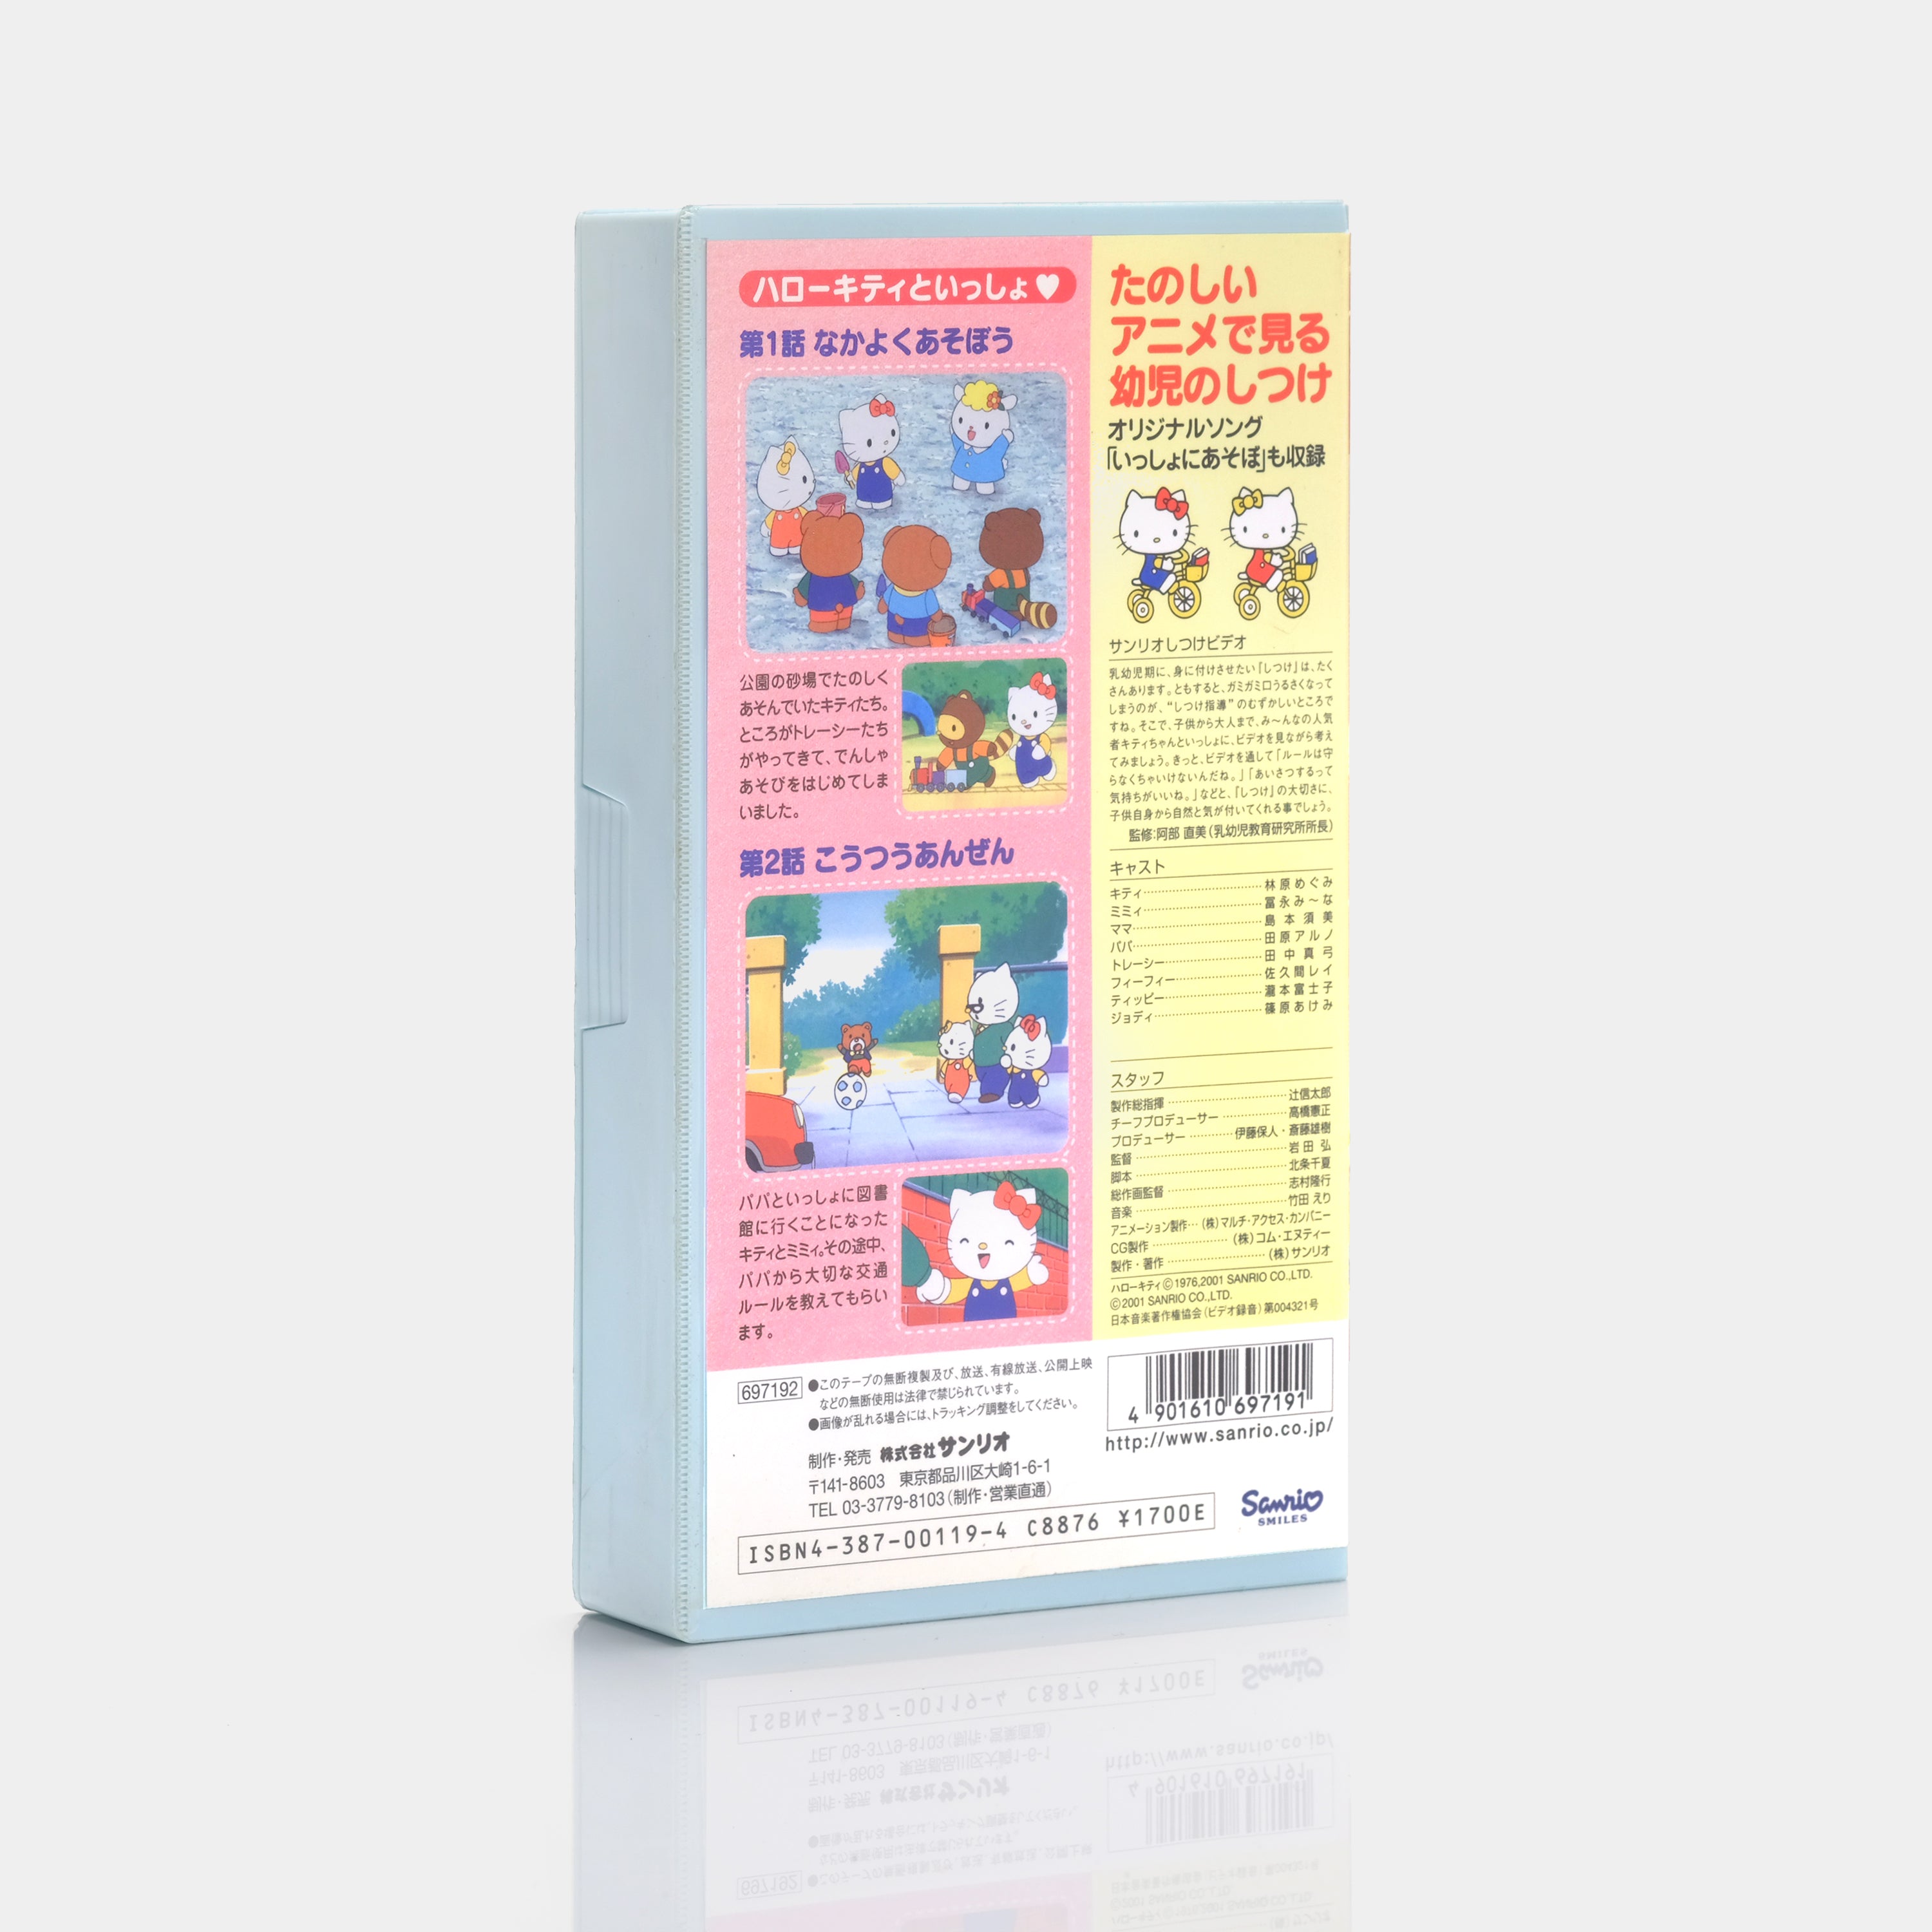 Sanrio Training Video: Let's Play Together VHS Tape